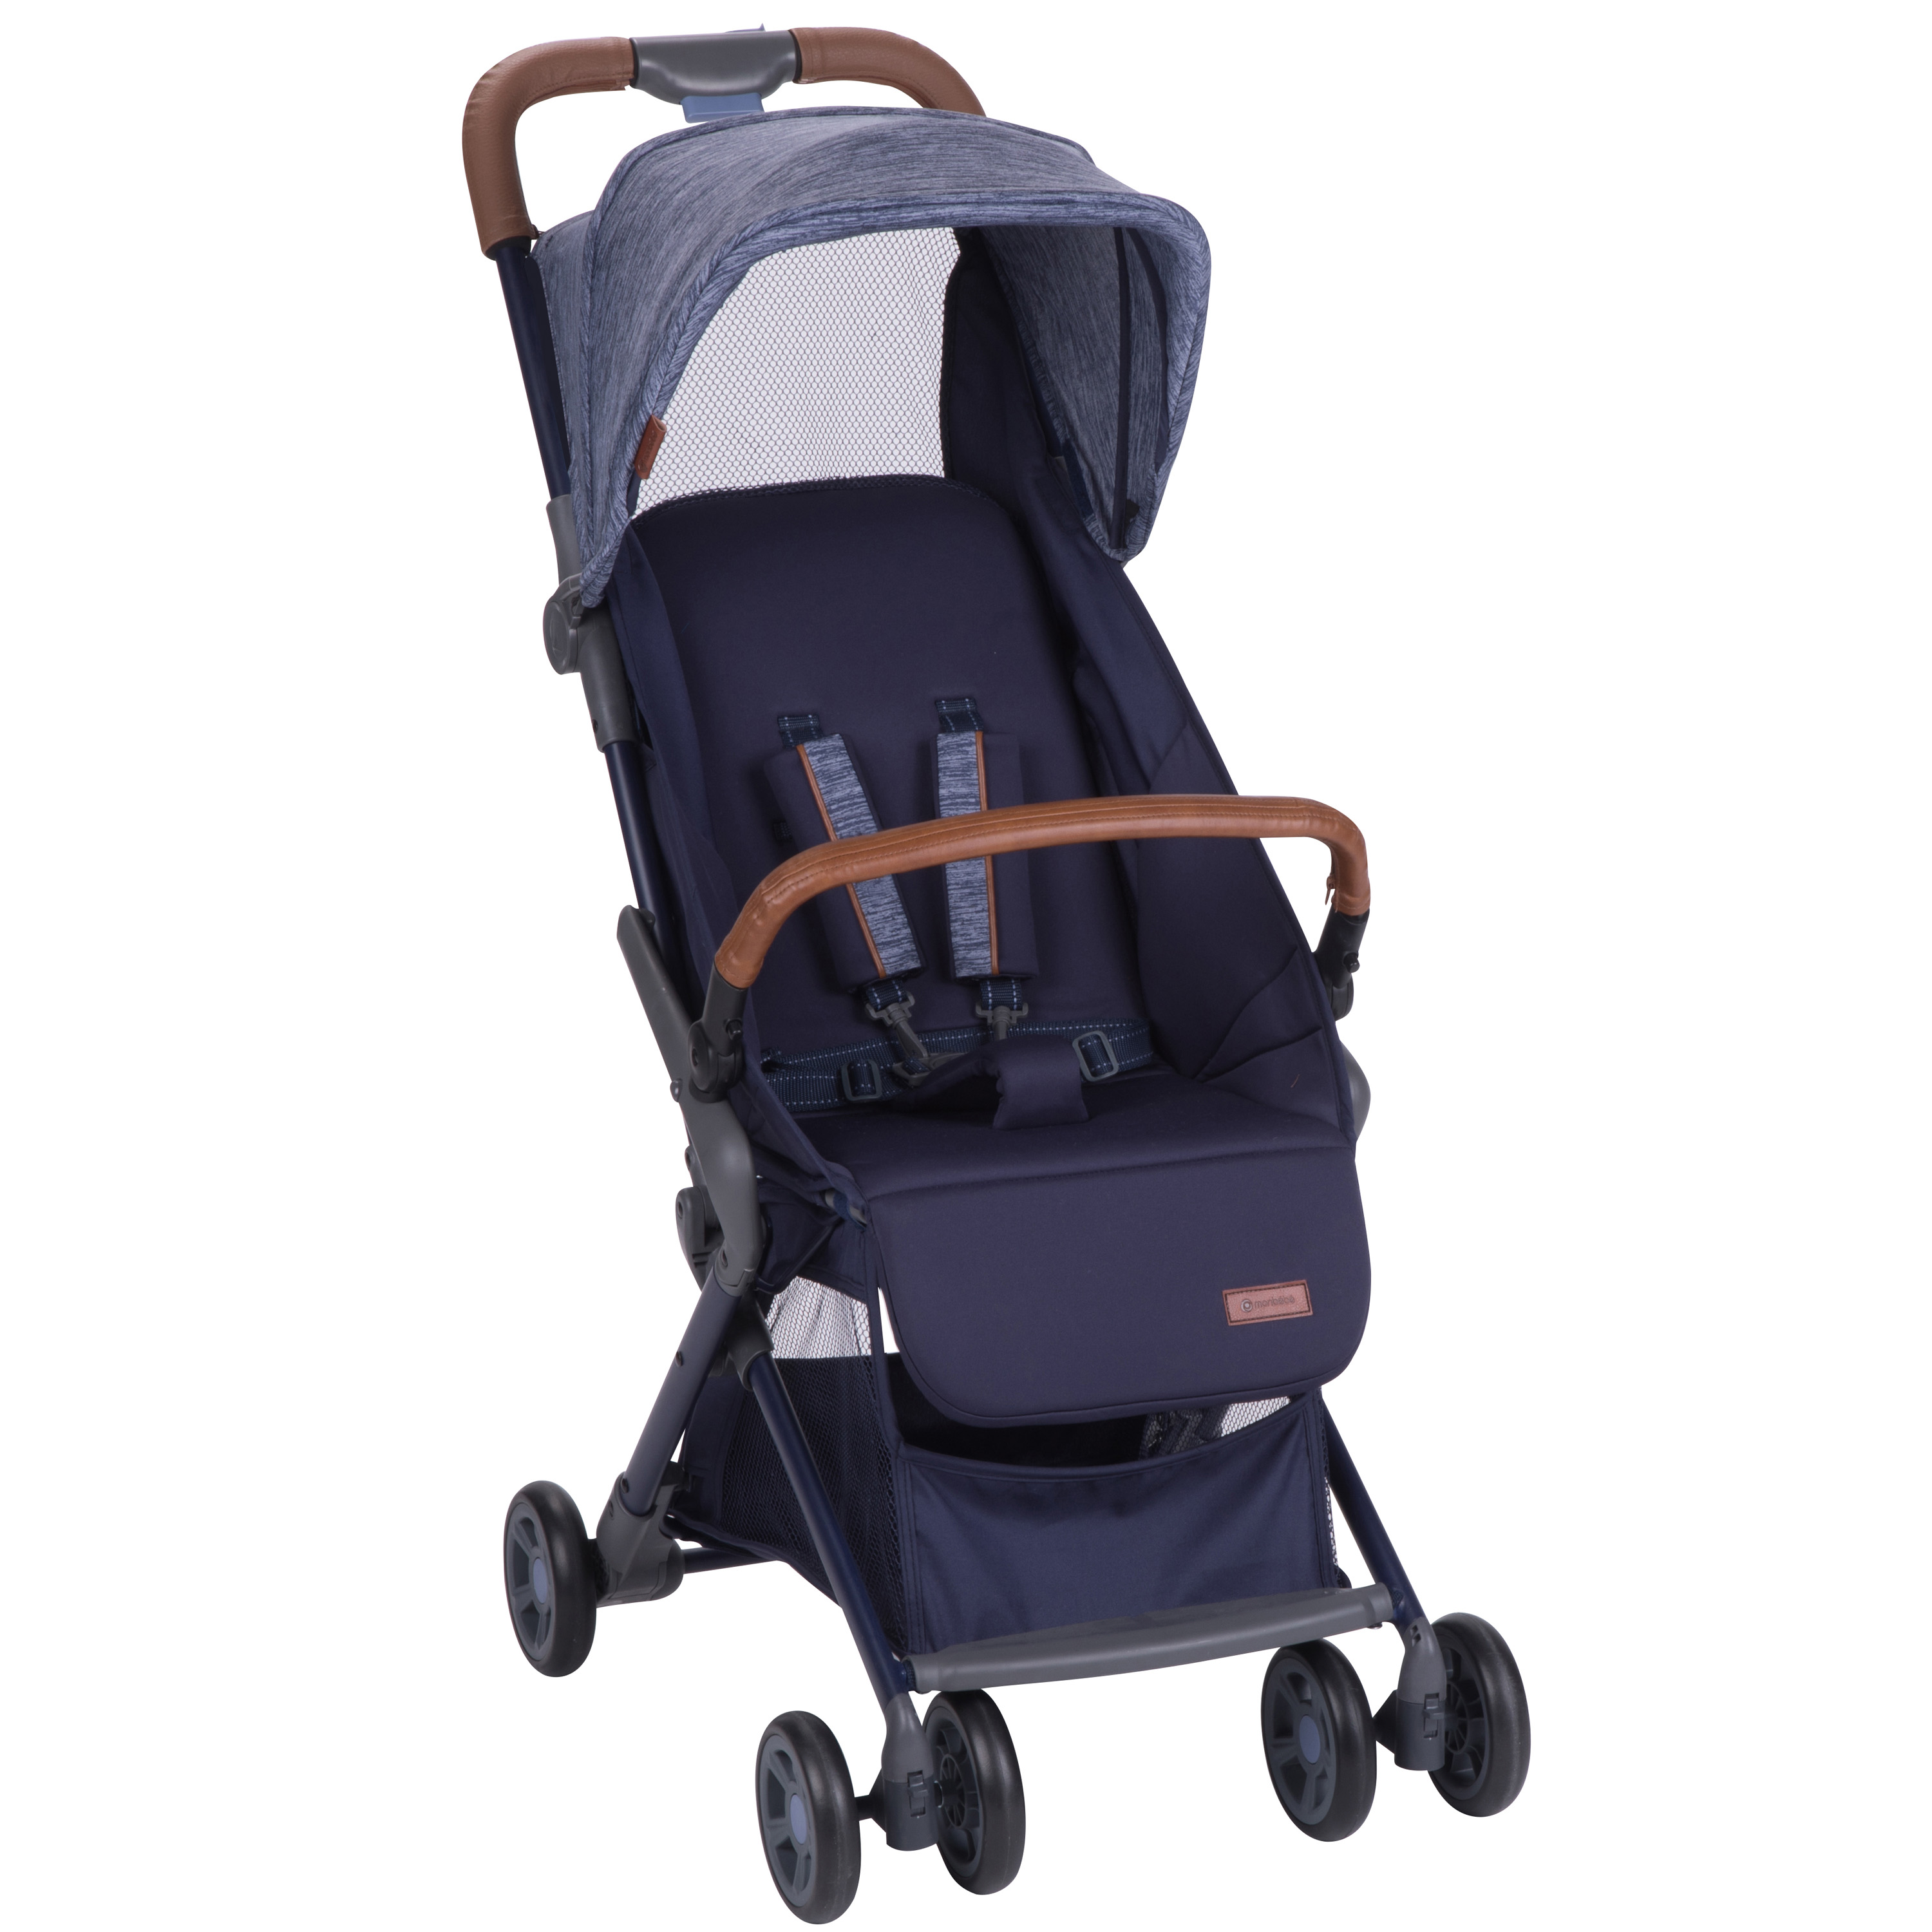 MonBebe Cube Compact Stroller with storage and visor, Blue Boho - image 10 of 17